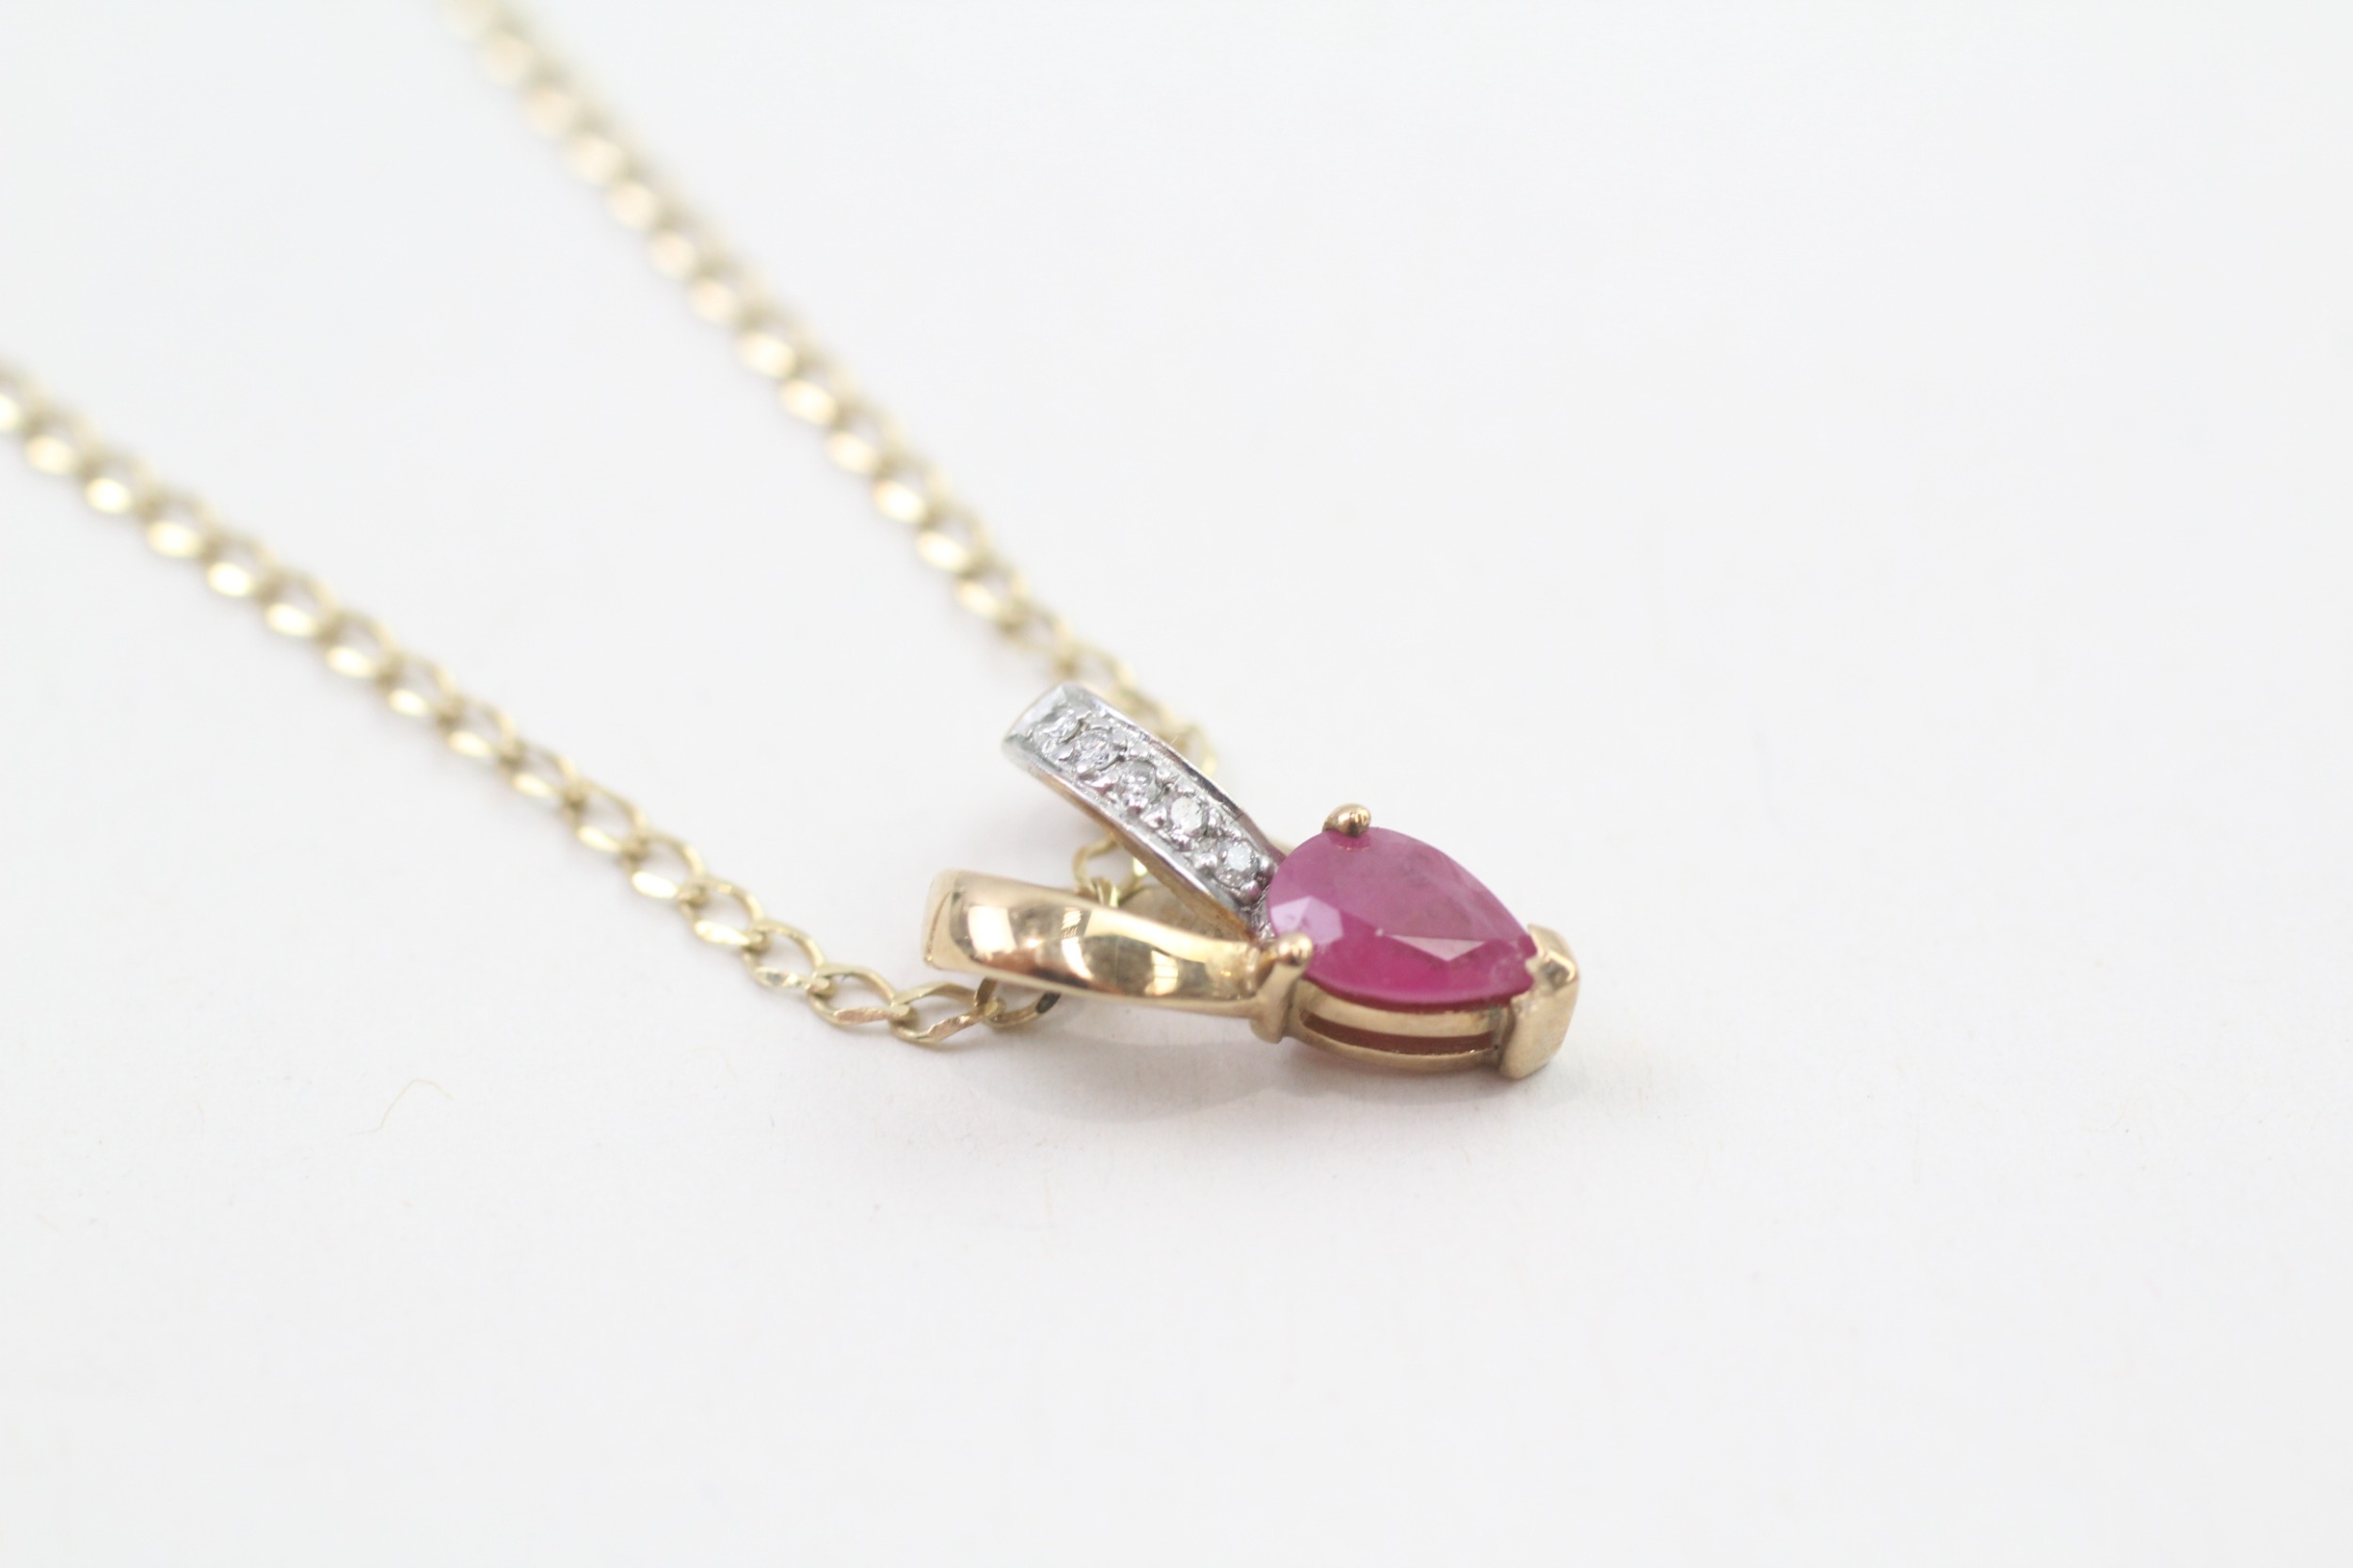 9ct gold pear cut ruby & diamond pendant necklace (2.1g) - Image 2 of 4